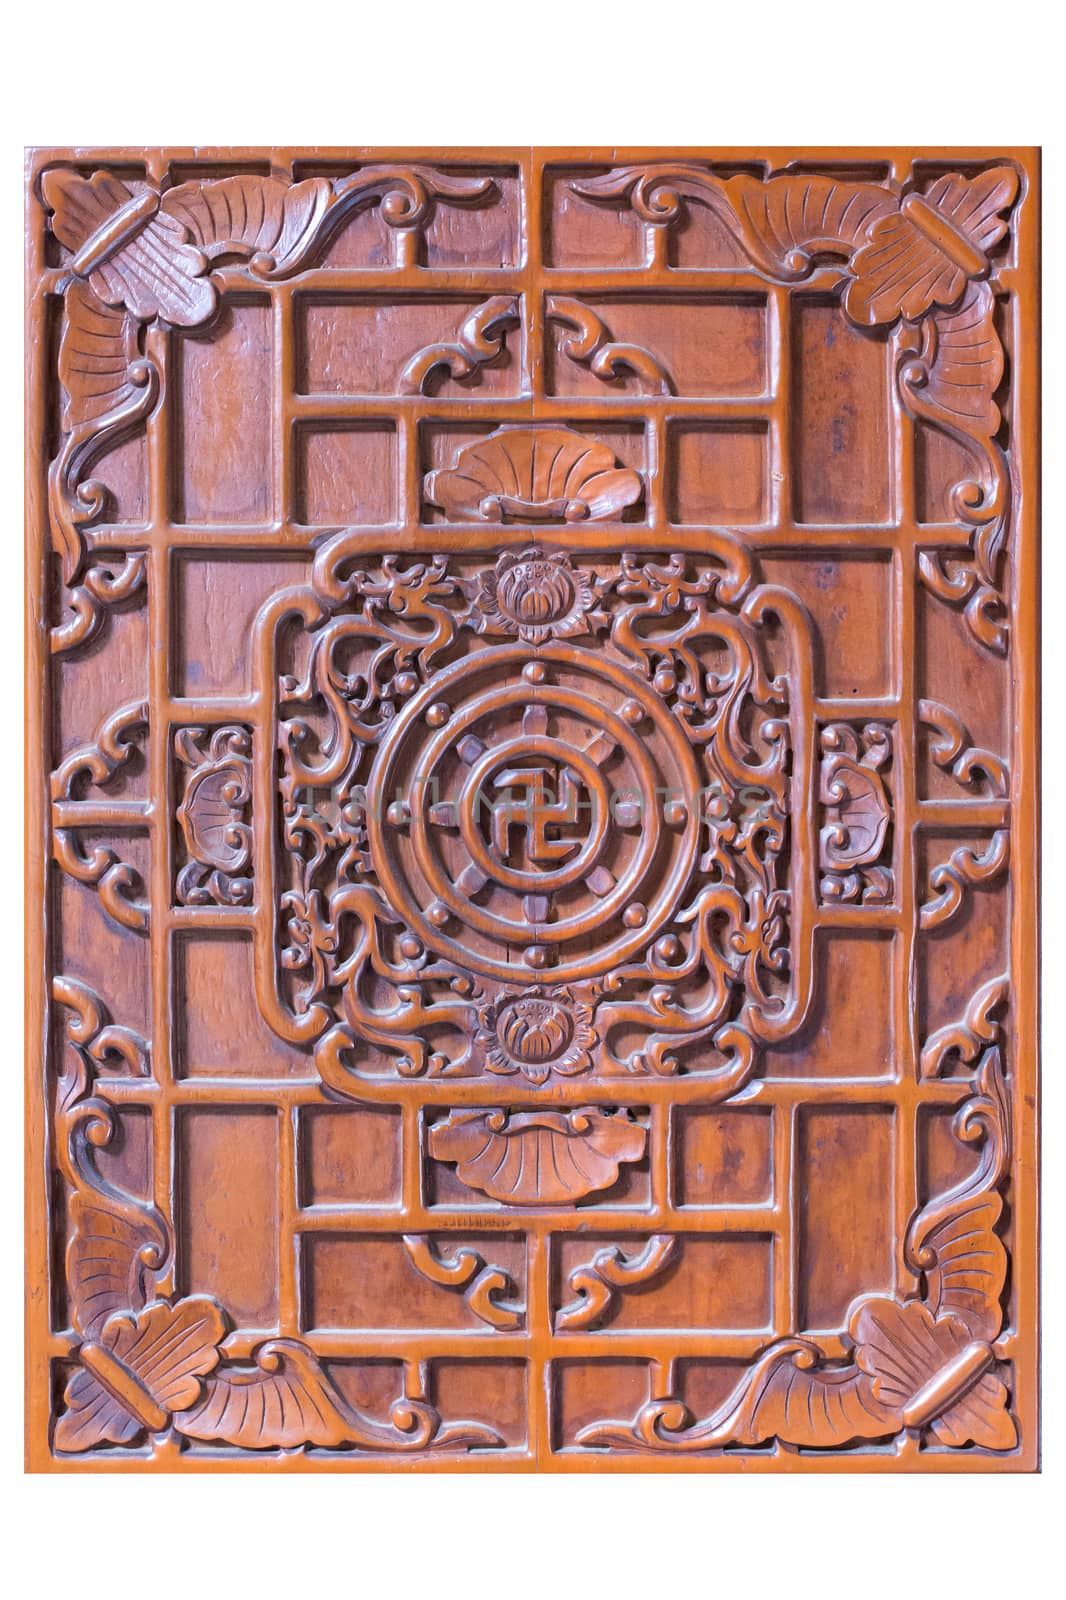 Chinese Symbol Pattern on Wood by ngarare